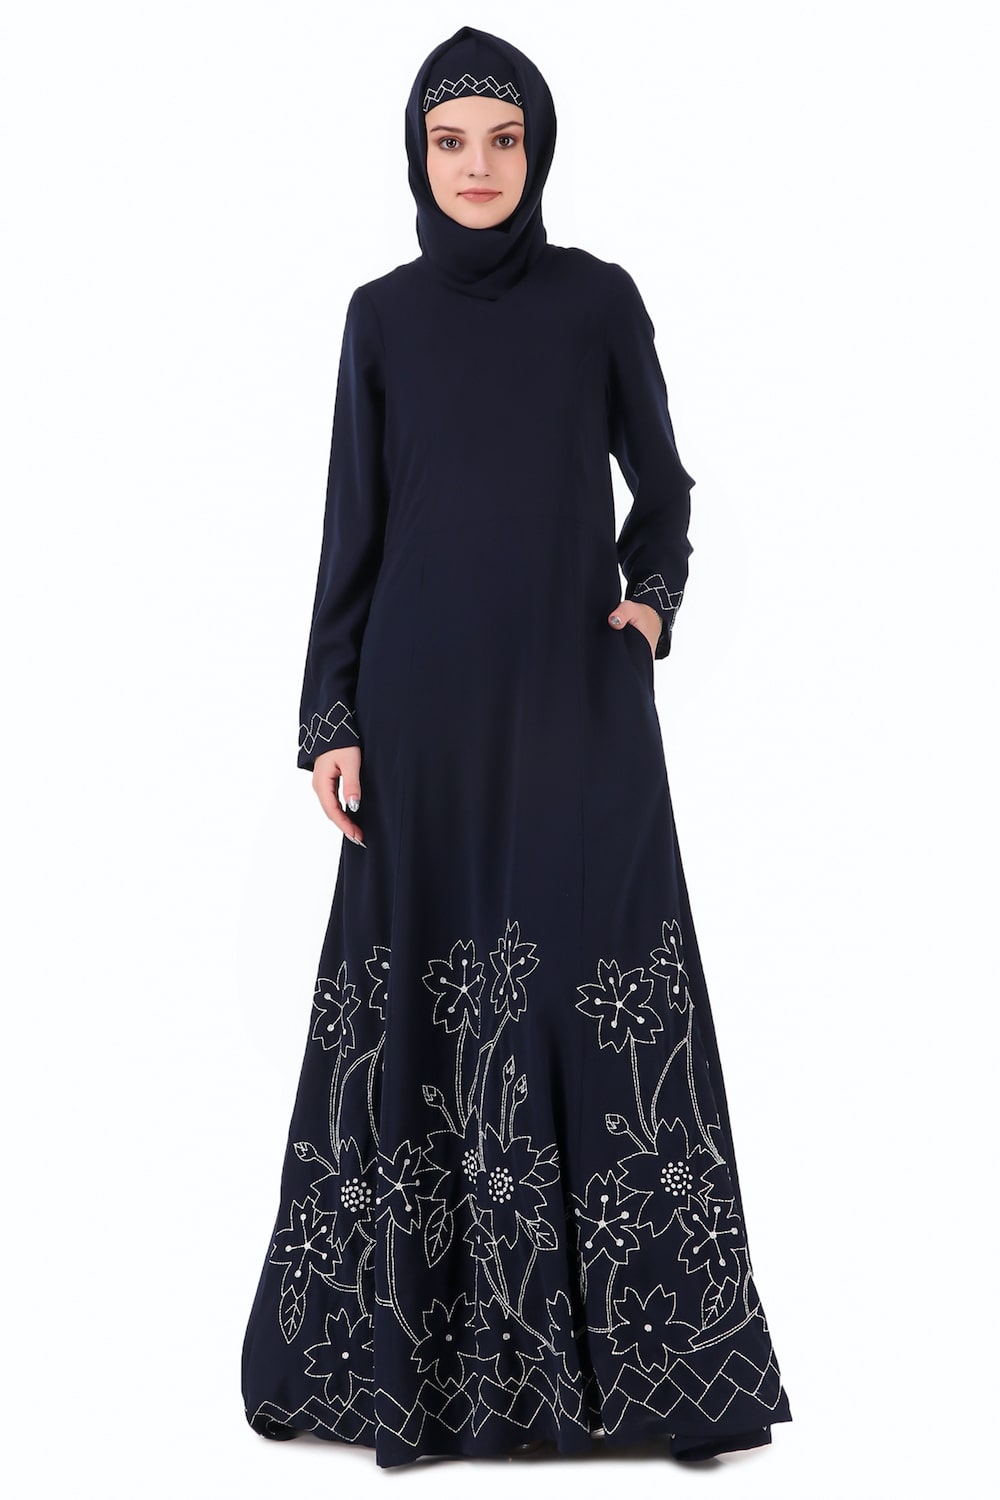 Floral Geo Embroidery Navy Blue Abaya